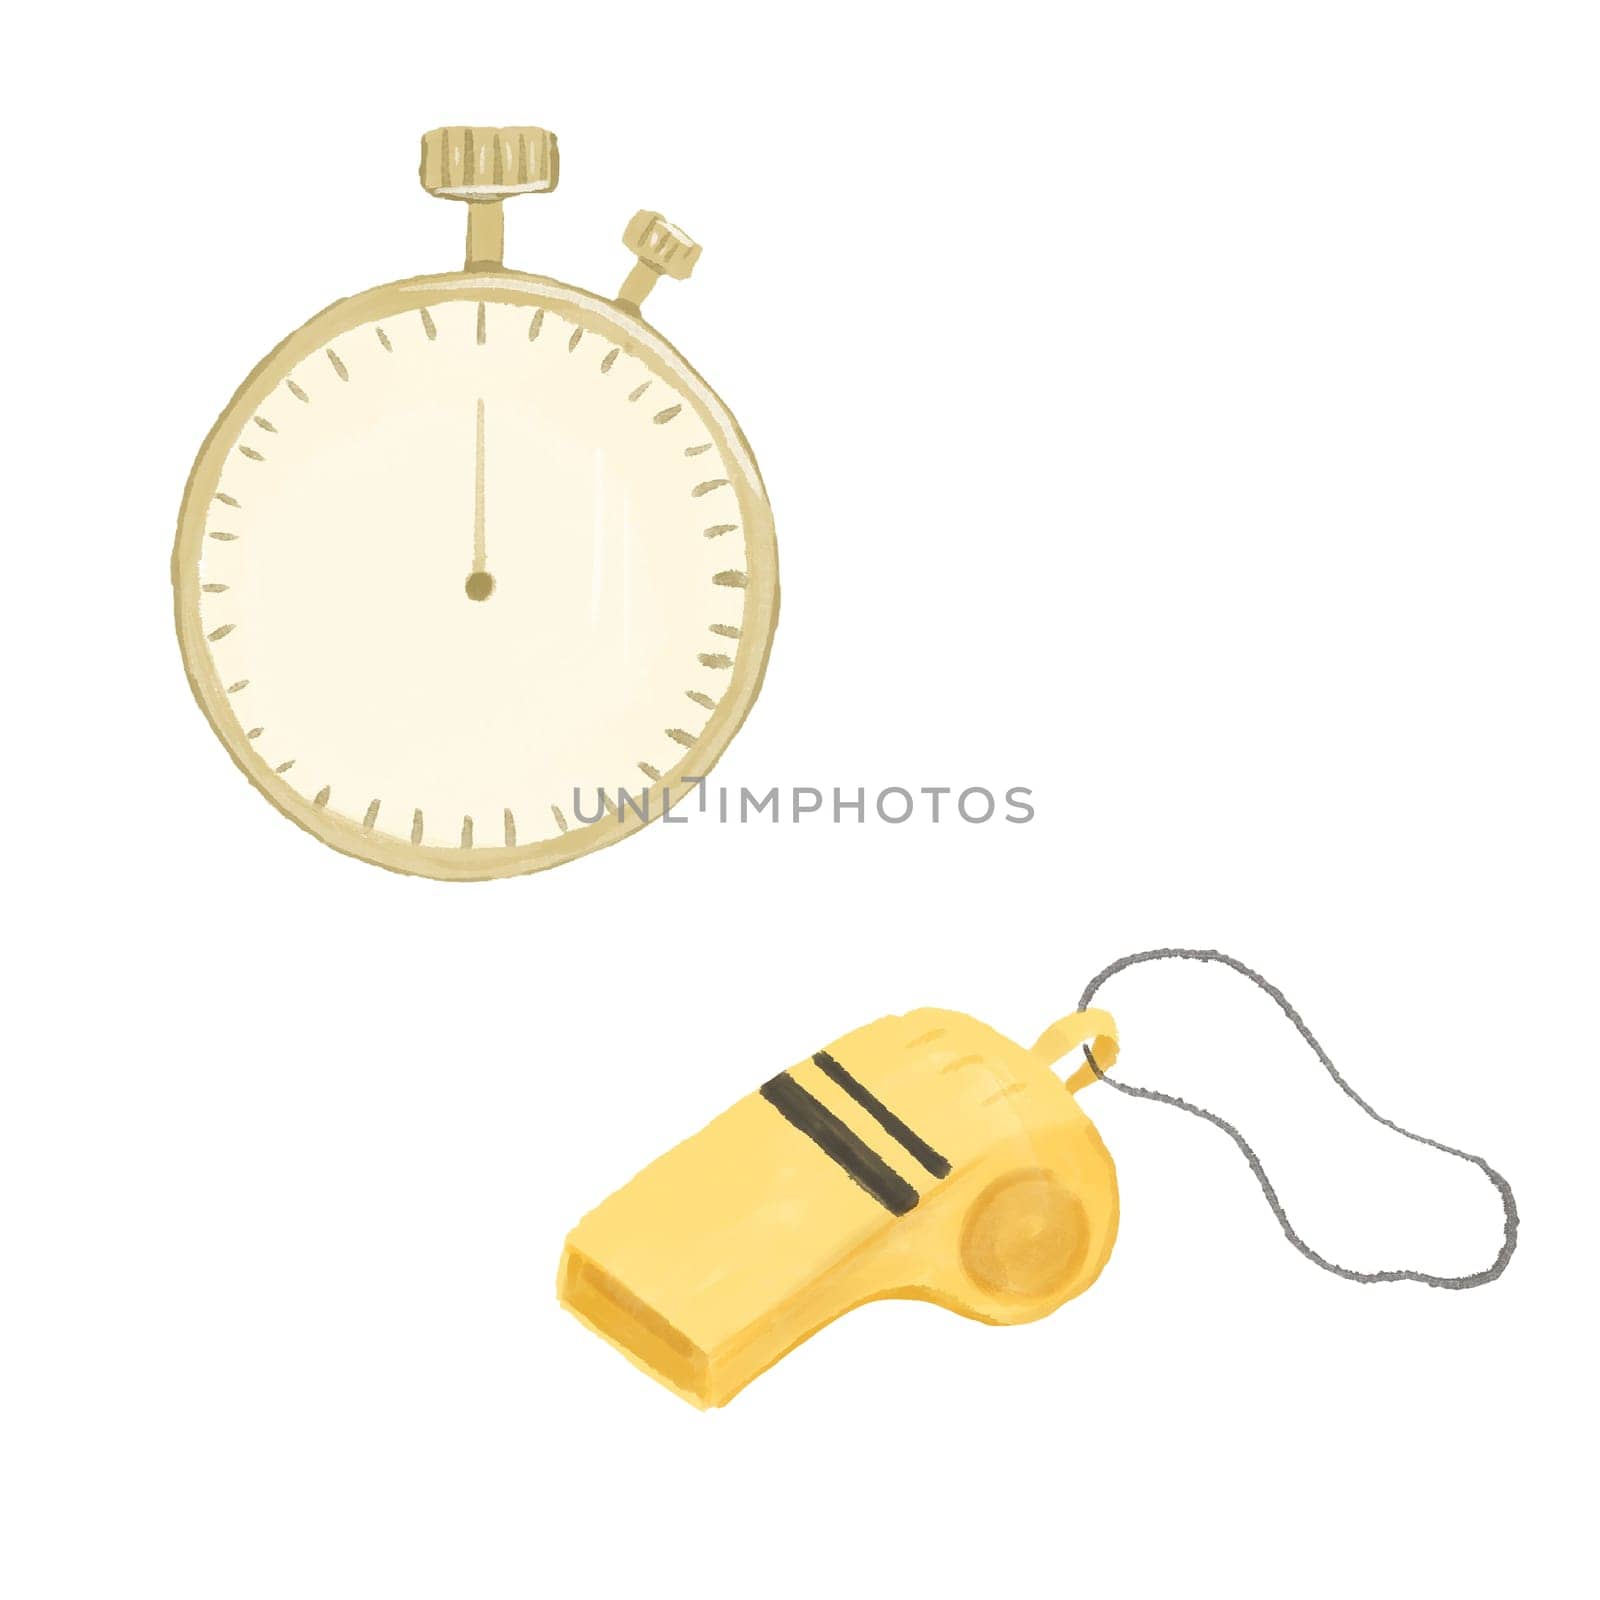 Hand drawn stopwatch timer and whistle isolated on white. Stopwatch quick delivery speed concept, express and urgent services.